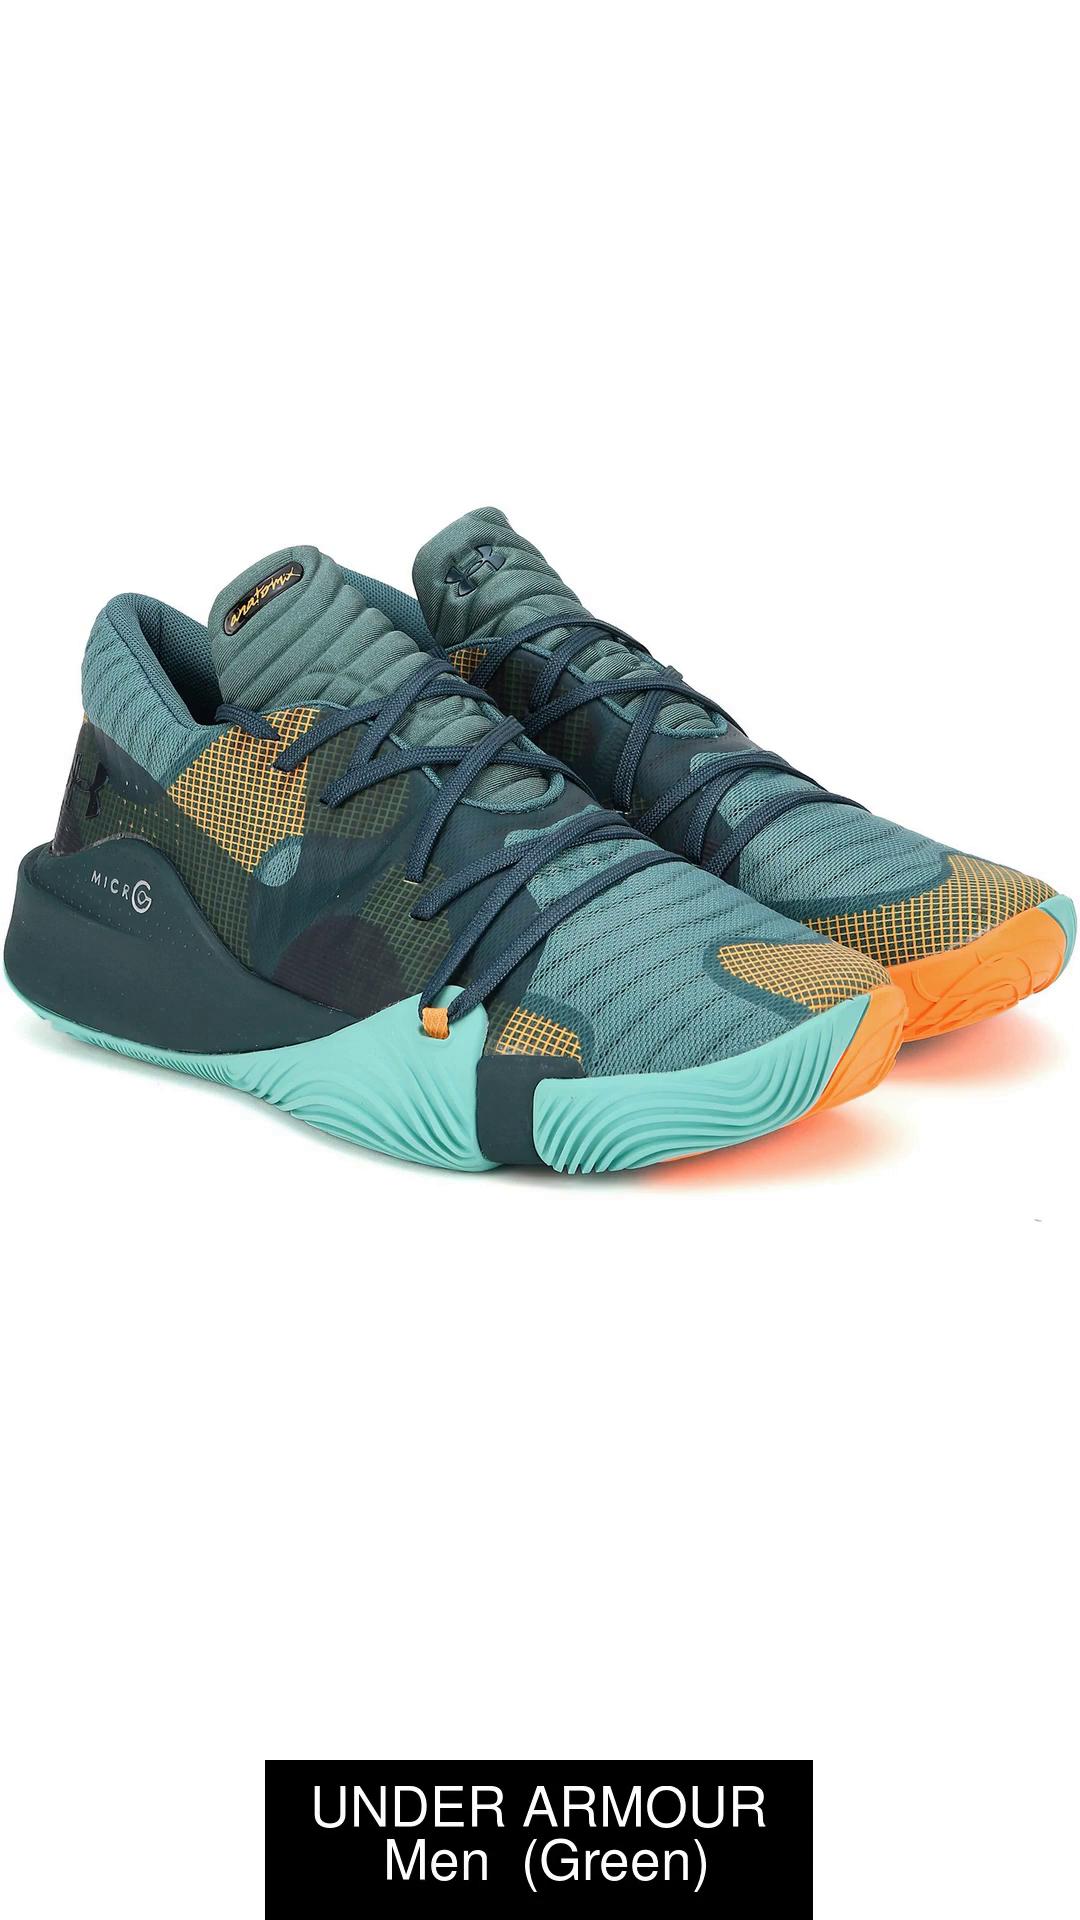 UNDER ARMOUR Spawn Low Basketball Shoes For Men - Buy UNDER ARMOUR Spawn  Low Basketball Shoes For Men Online at Best Price - Shop Online for  Footwears in India